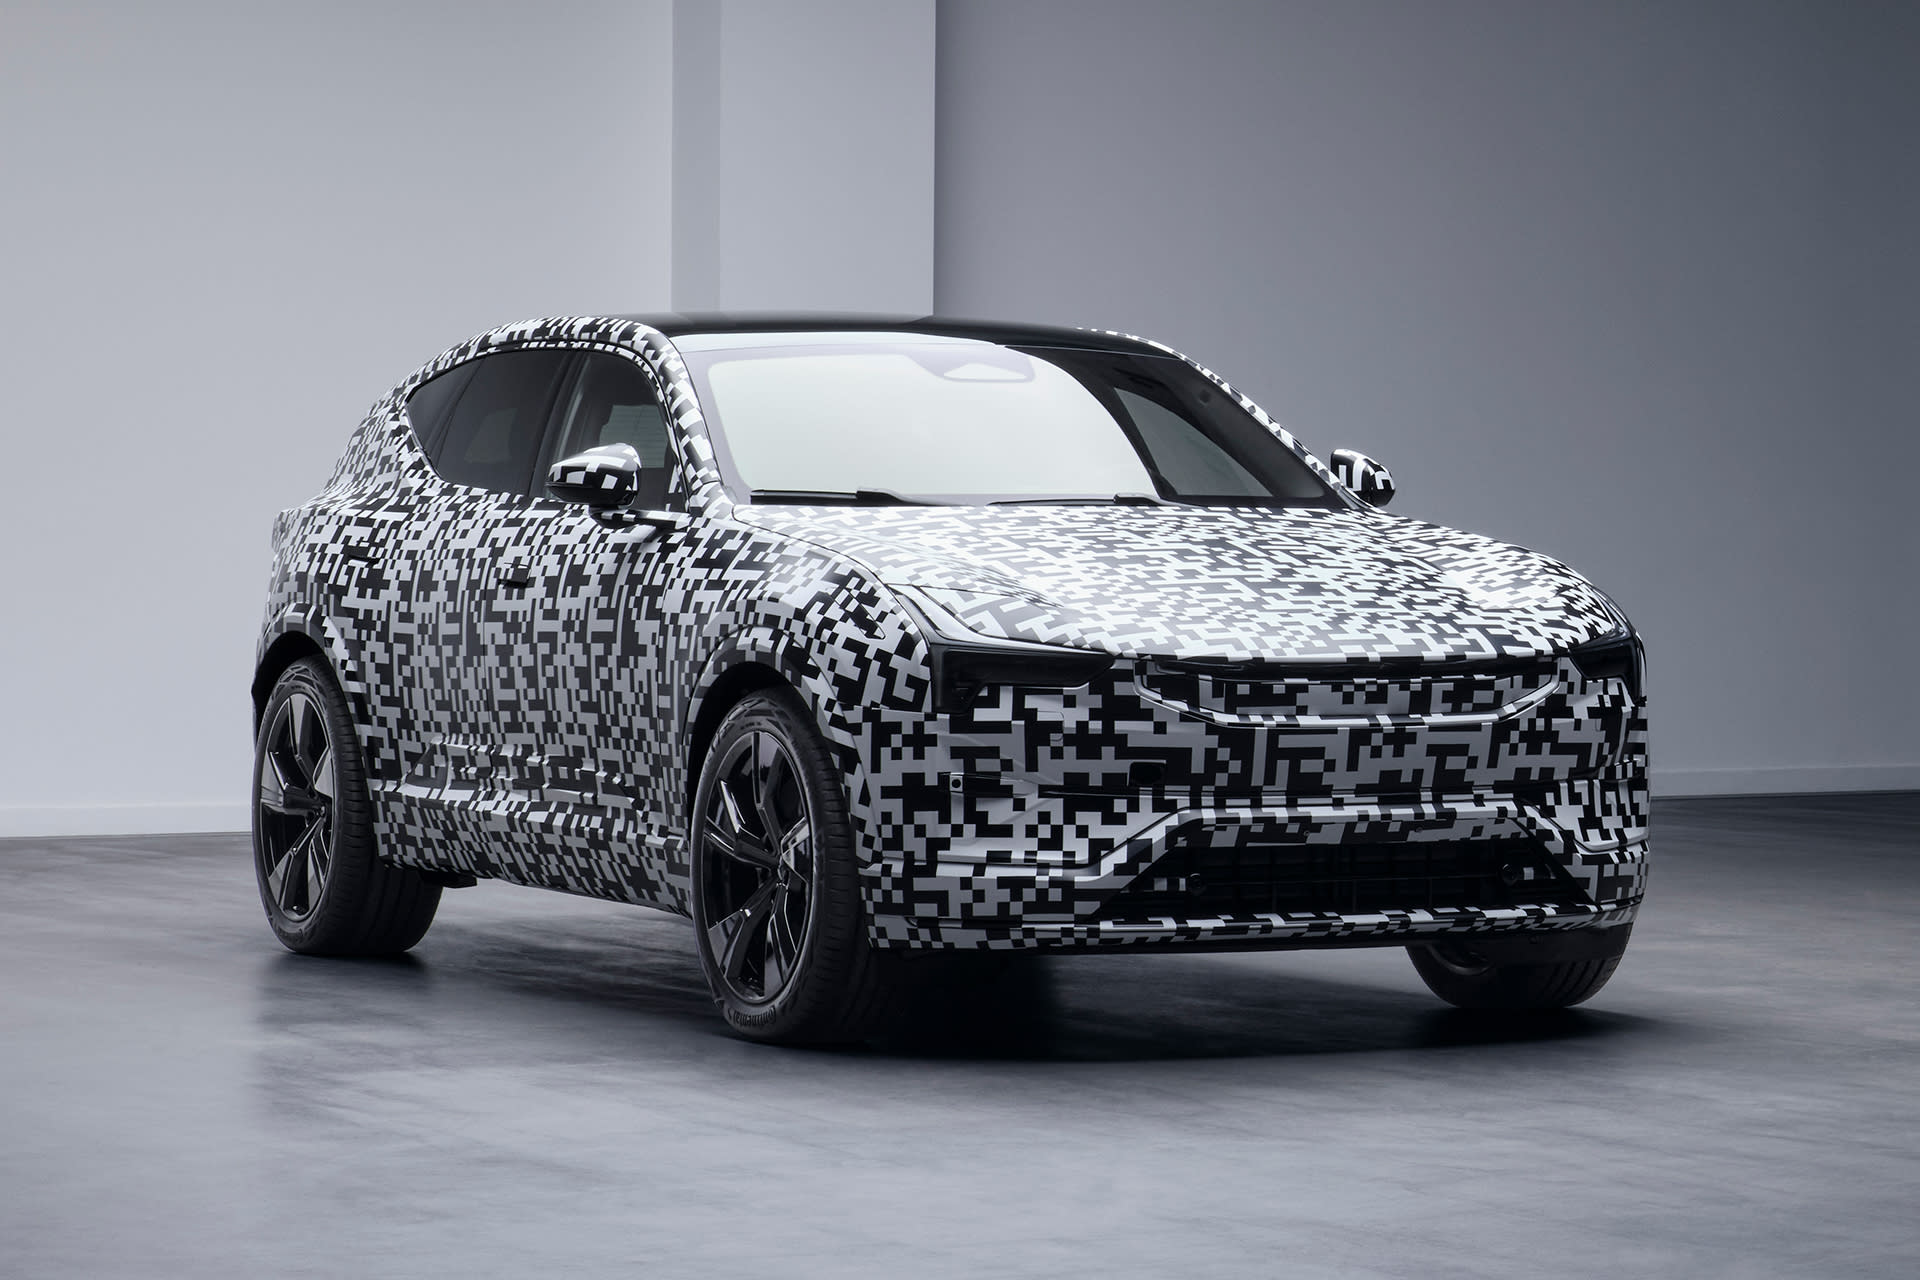 Polestar 3 electric SUV in camouflage